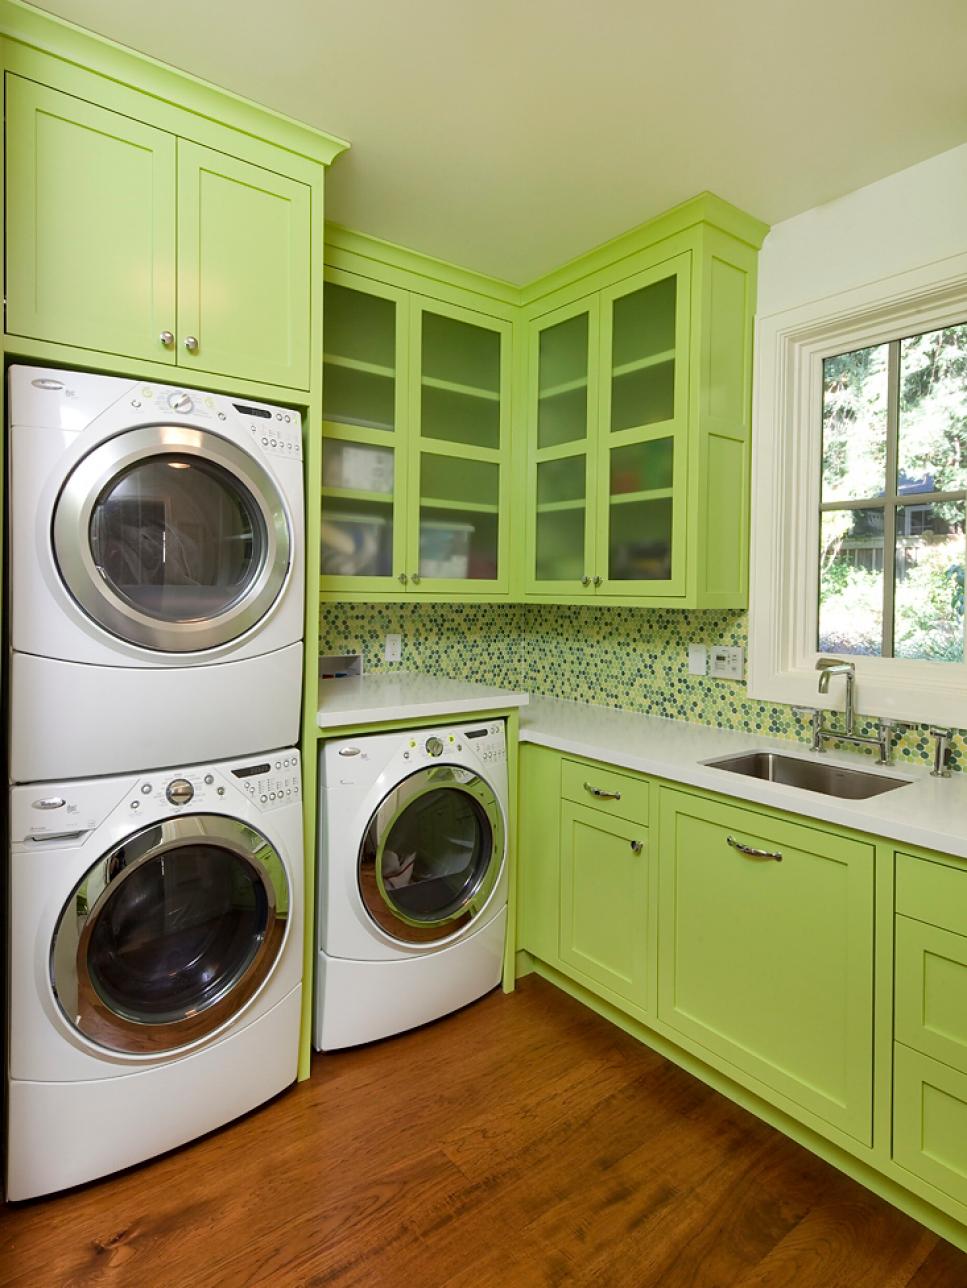  How To Decorate A Laundry Room for Simple Design